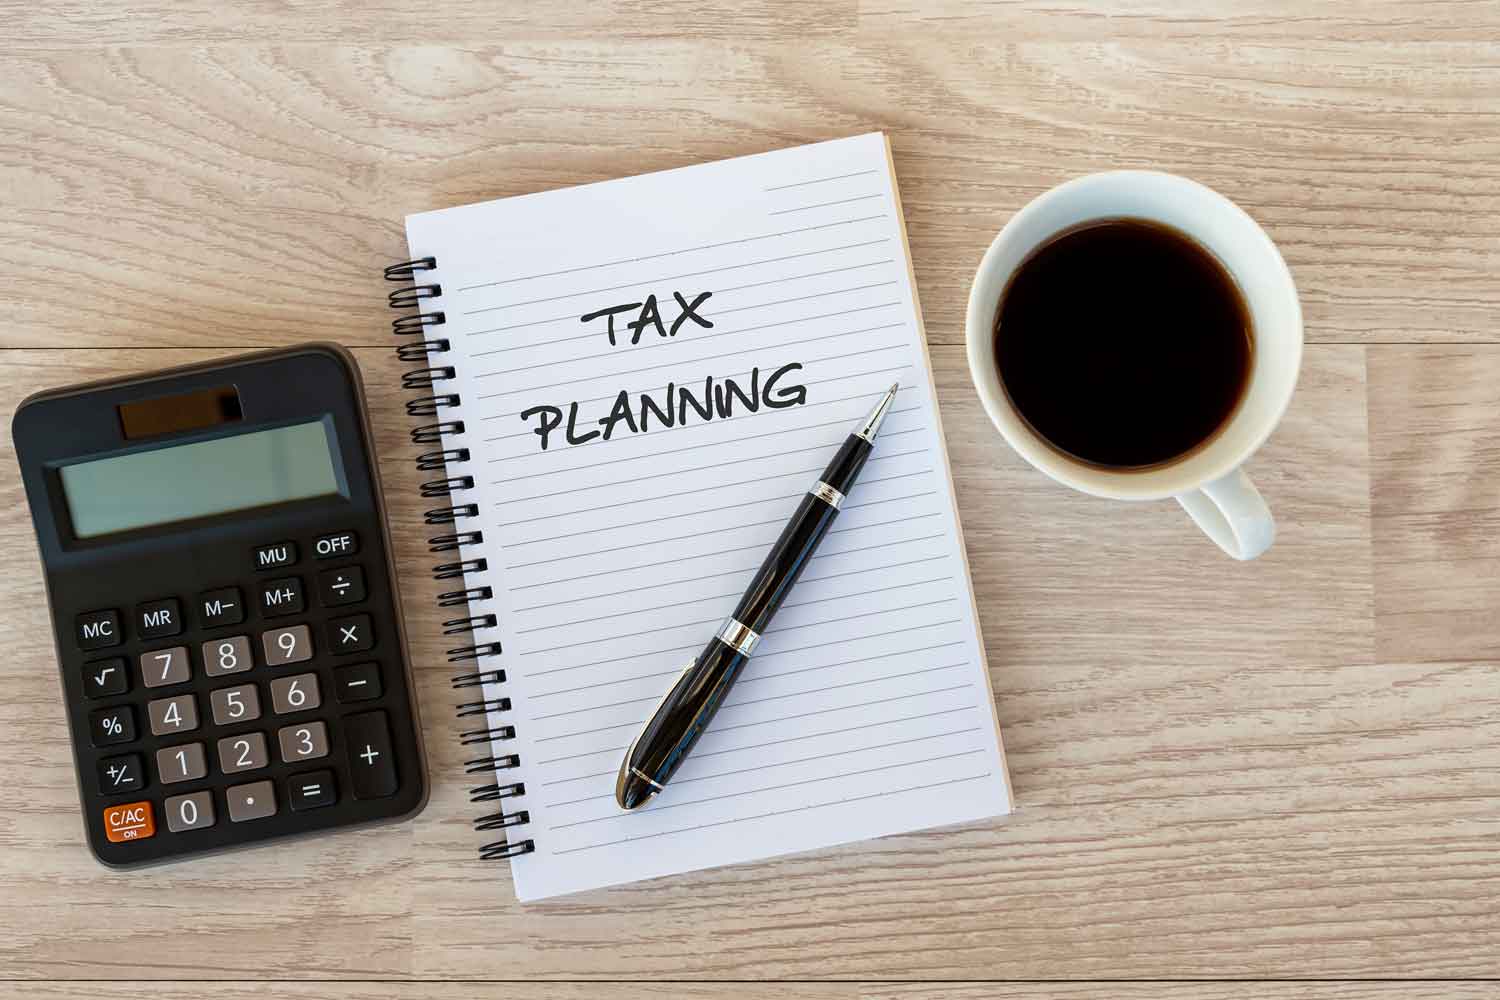 Notebook with the words "Tax Planning" on it with a pen, a cup of coffee and a calculator on a desk.